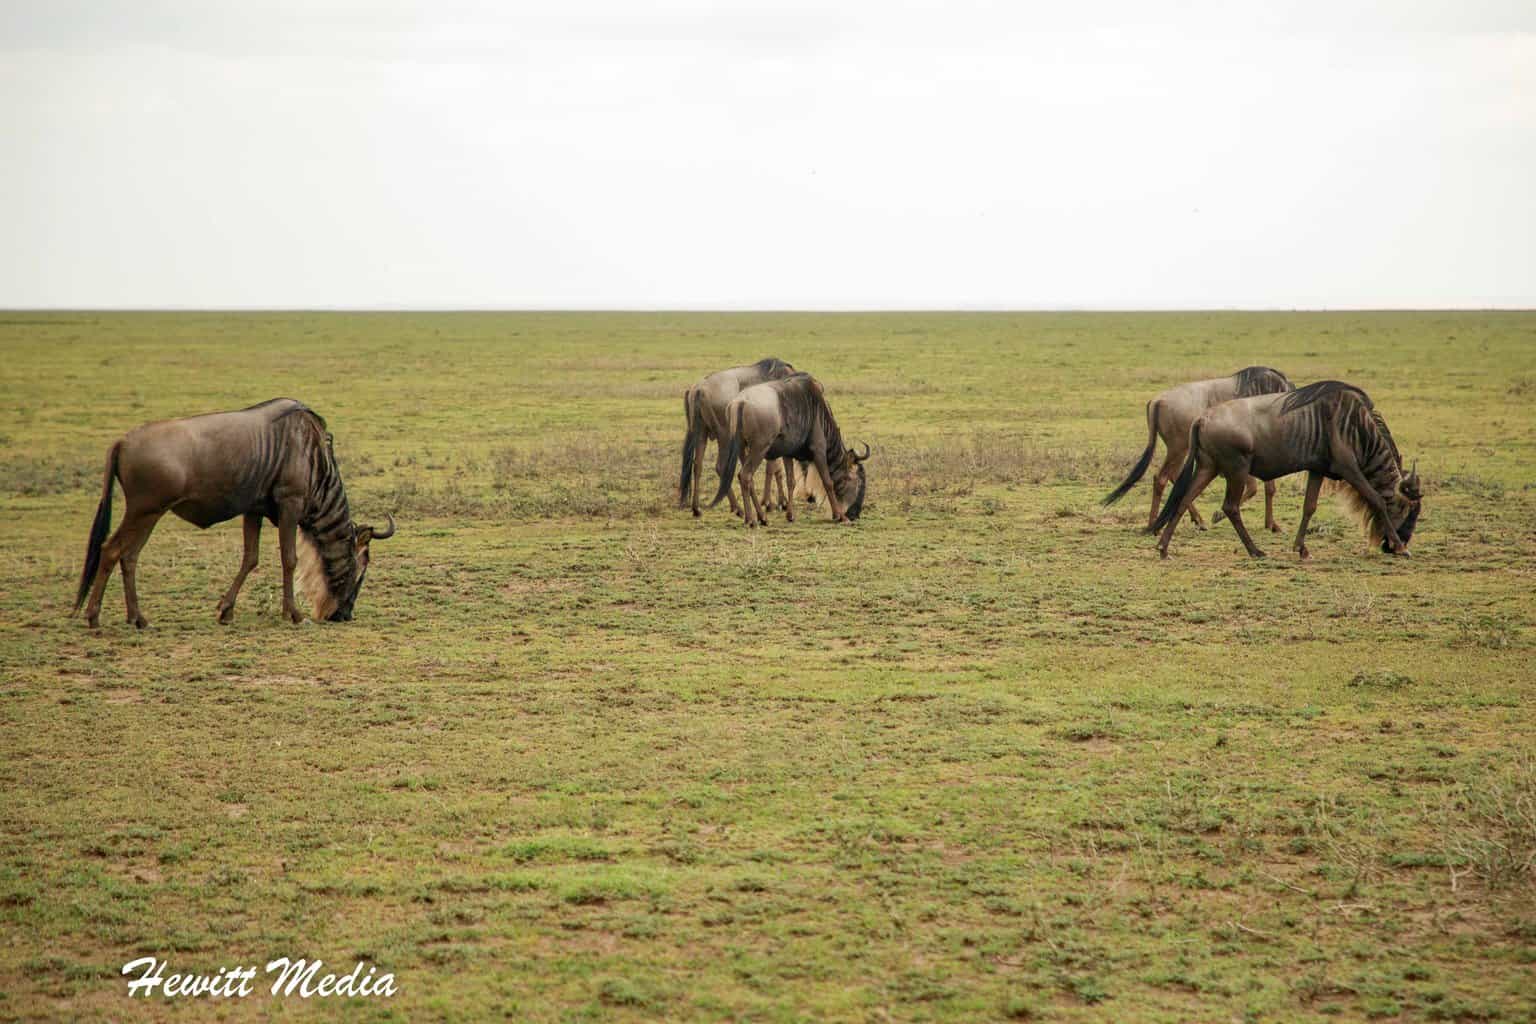 Top Travel Experiences - See the Great Wildebeest Migration in the Serengeti